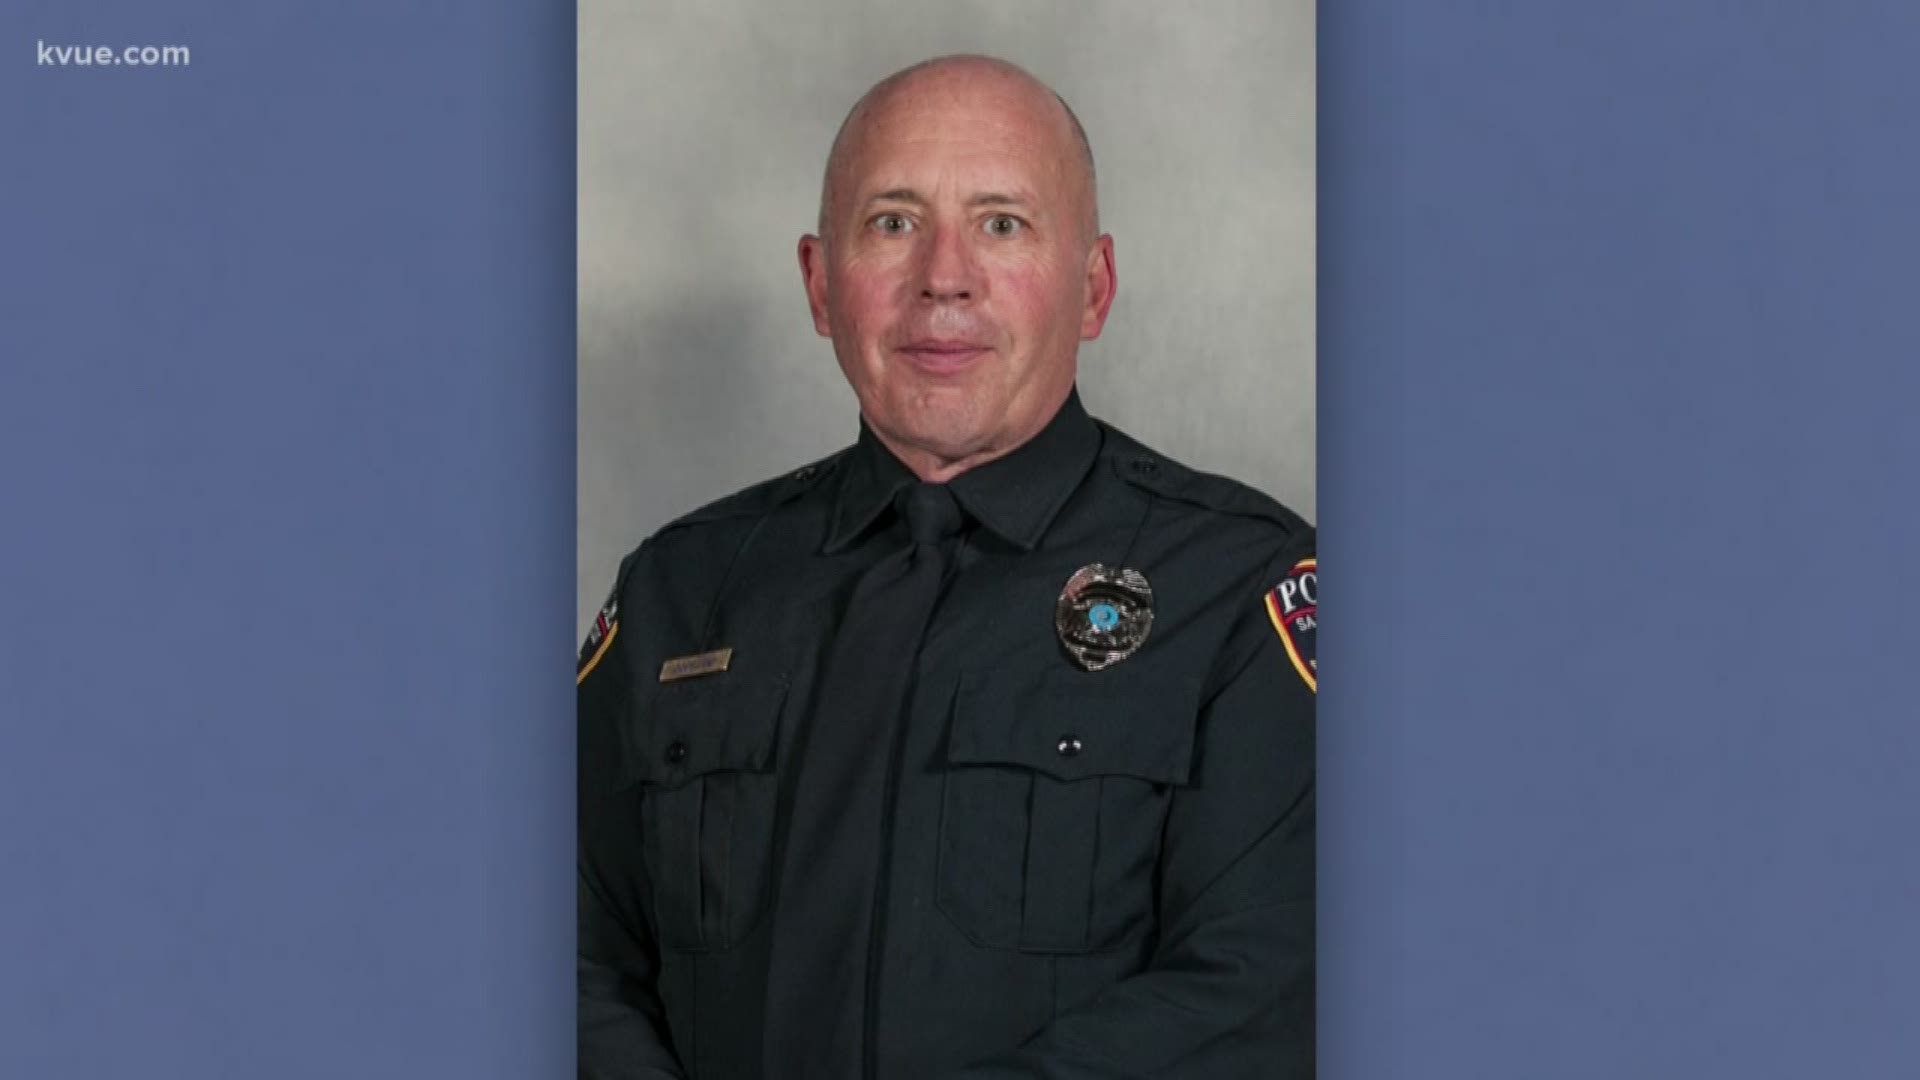 Officer Kenneth Copeland was helping serve a warrant when he was shot Monday, and later died from his injuries at a hospital.